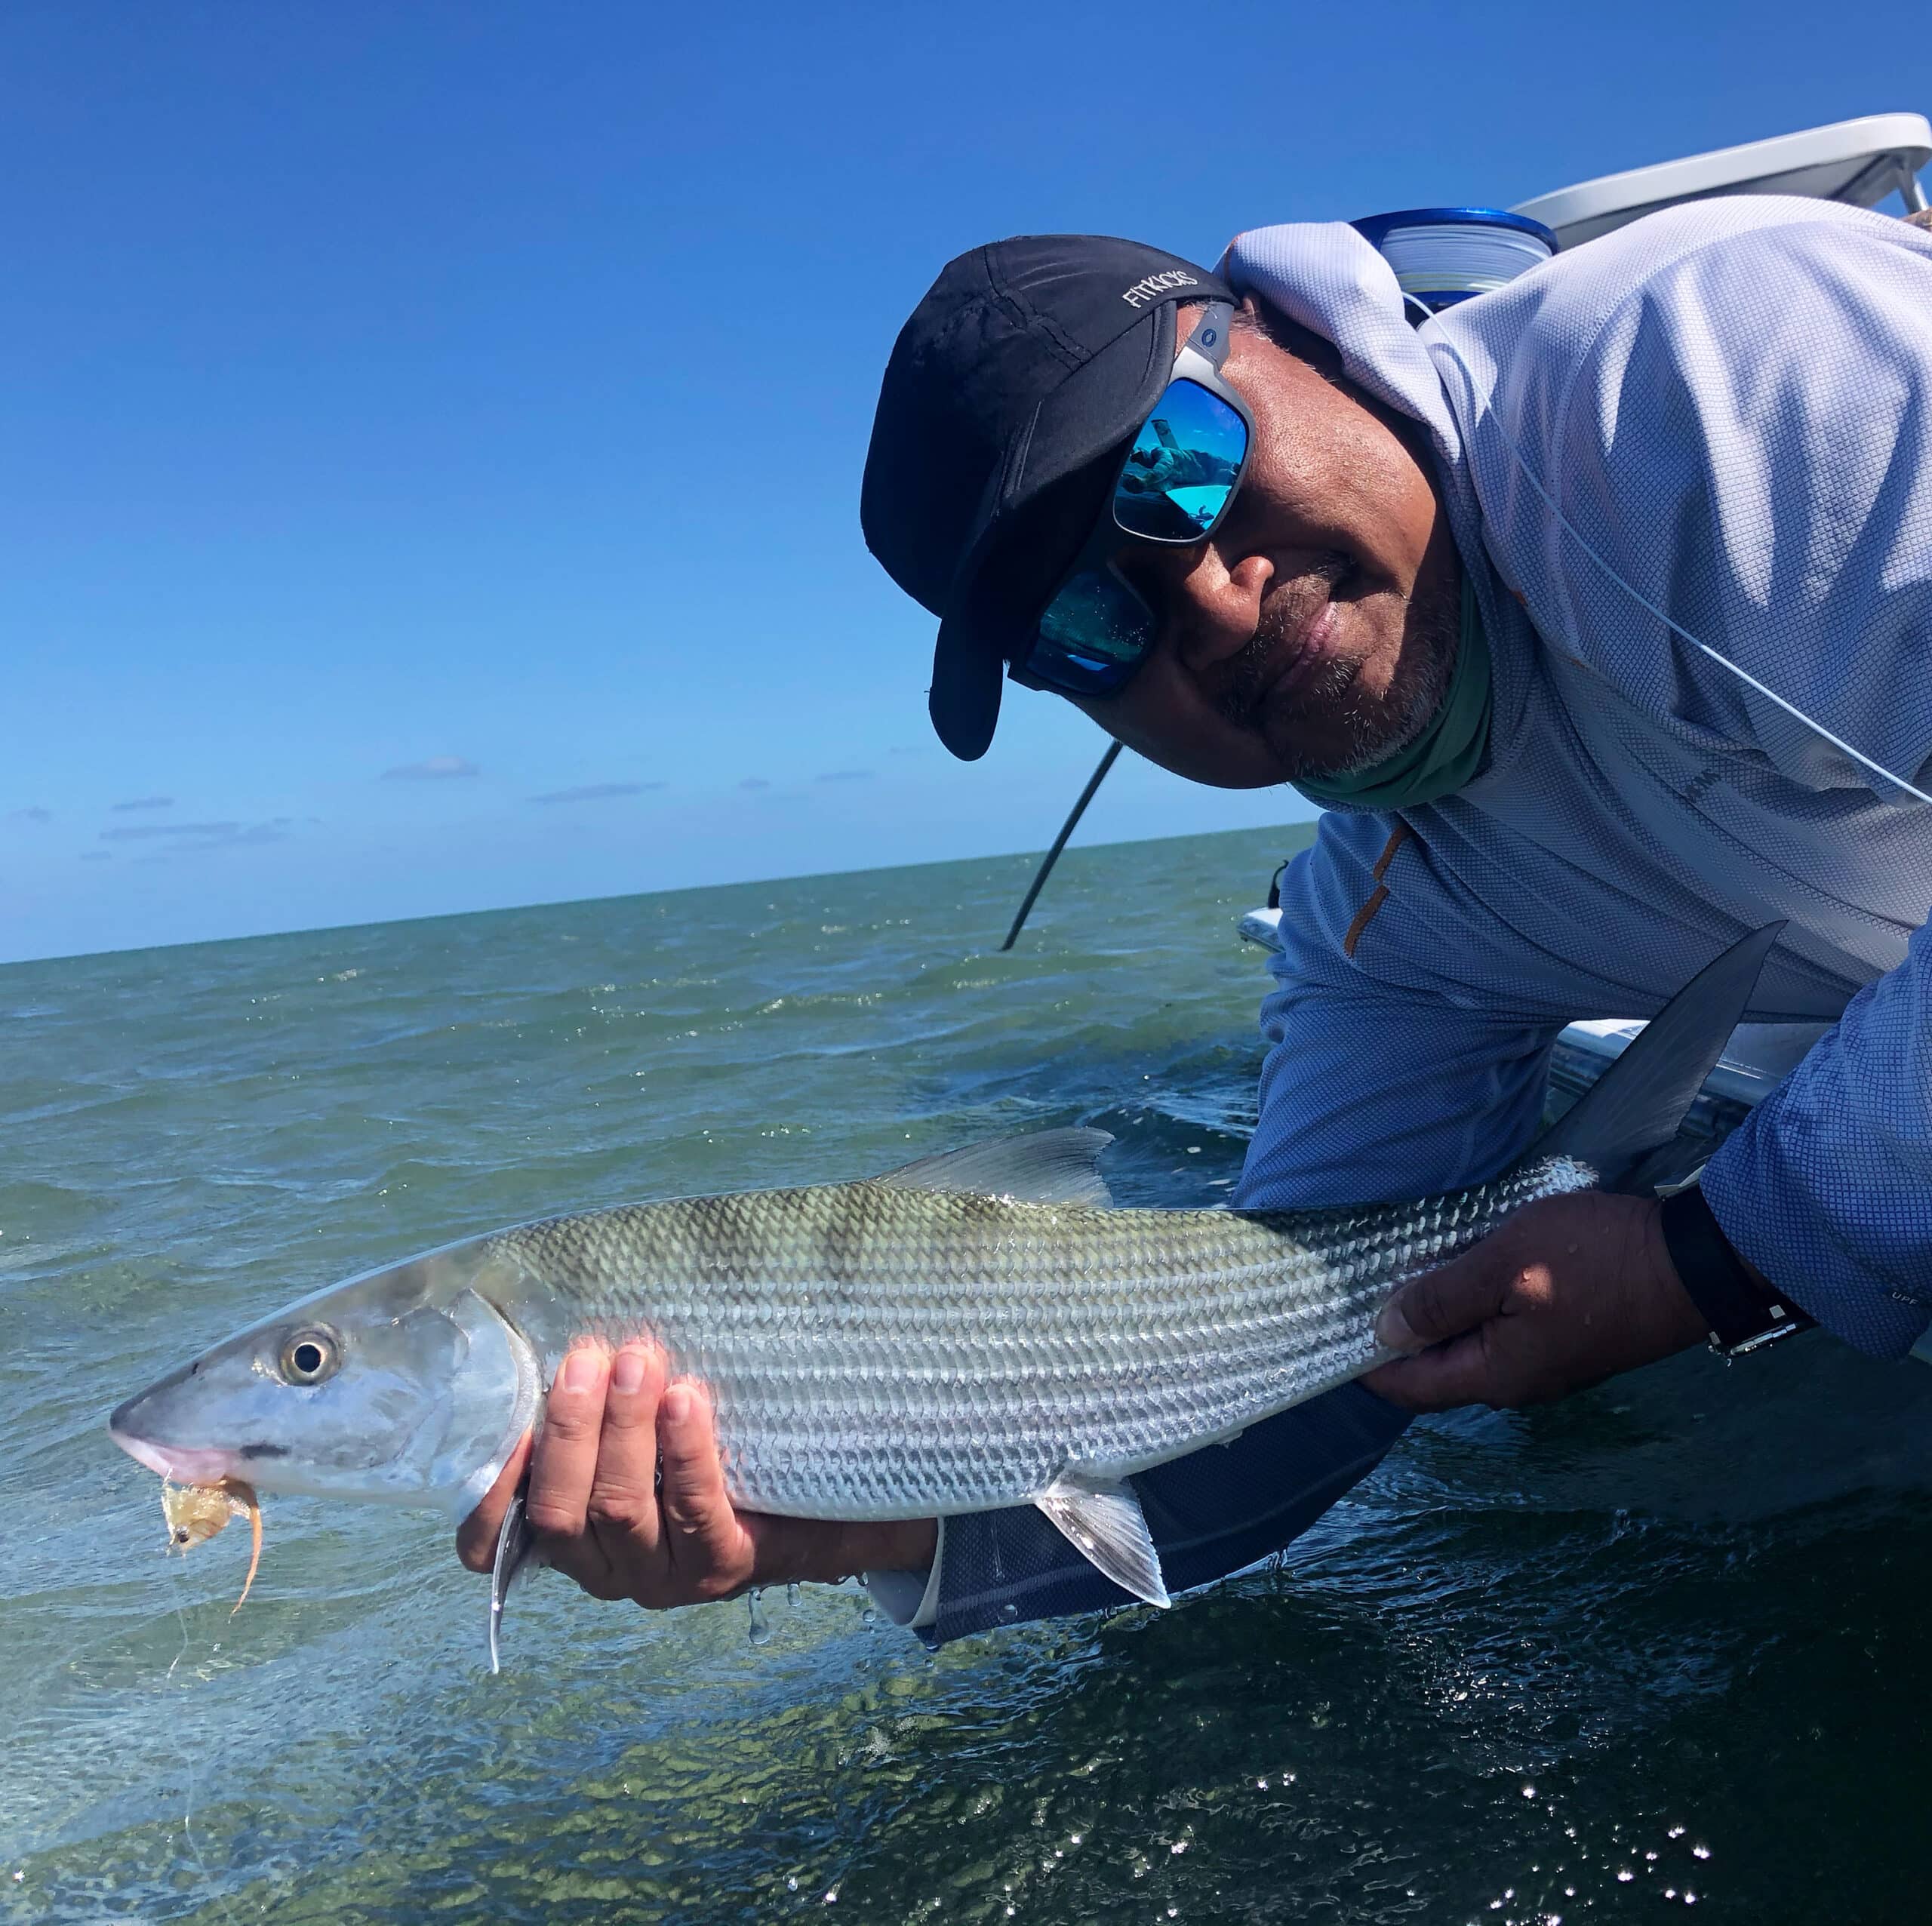 Winter's Whisper: Fly Fishing for Giant Bonefish in Biscayne Bay